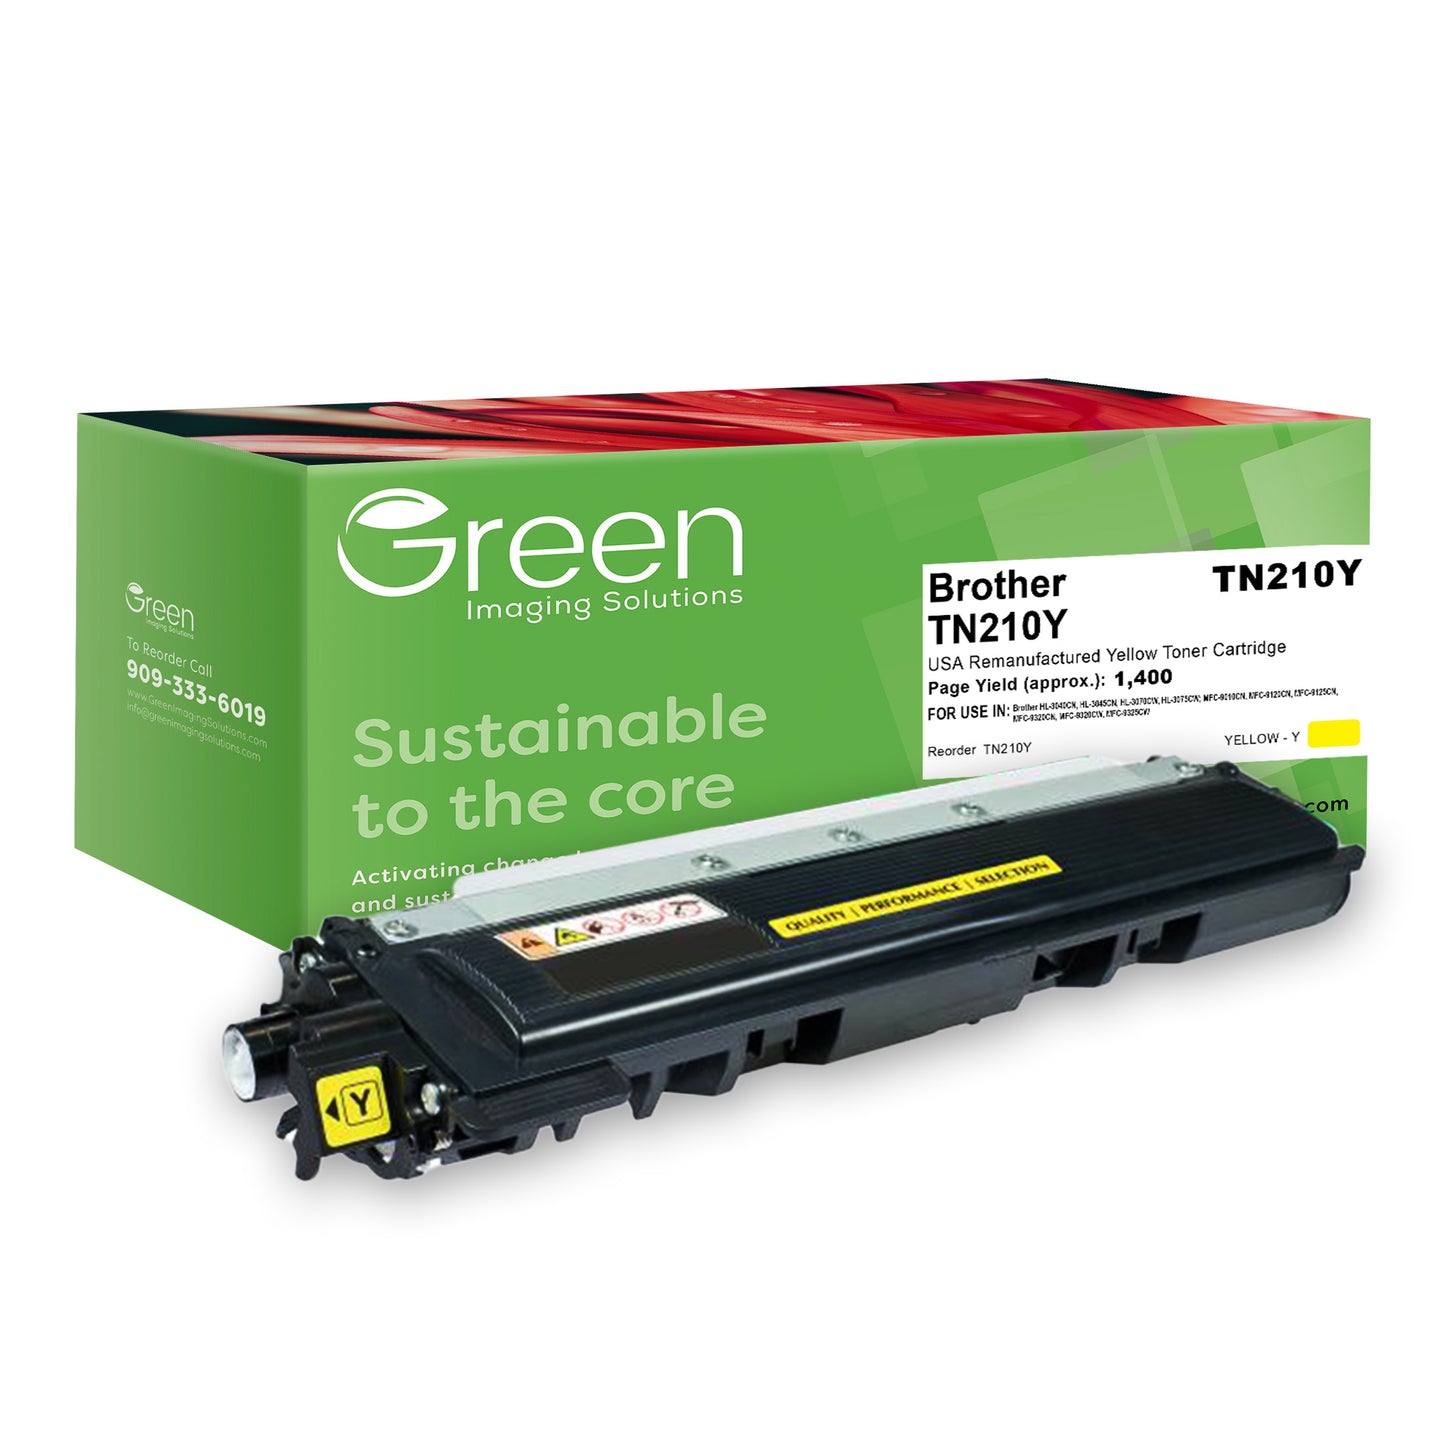 Green Imaging Solutions USA Remanufactured Yellow Toner Cartridge for Brother TN210